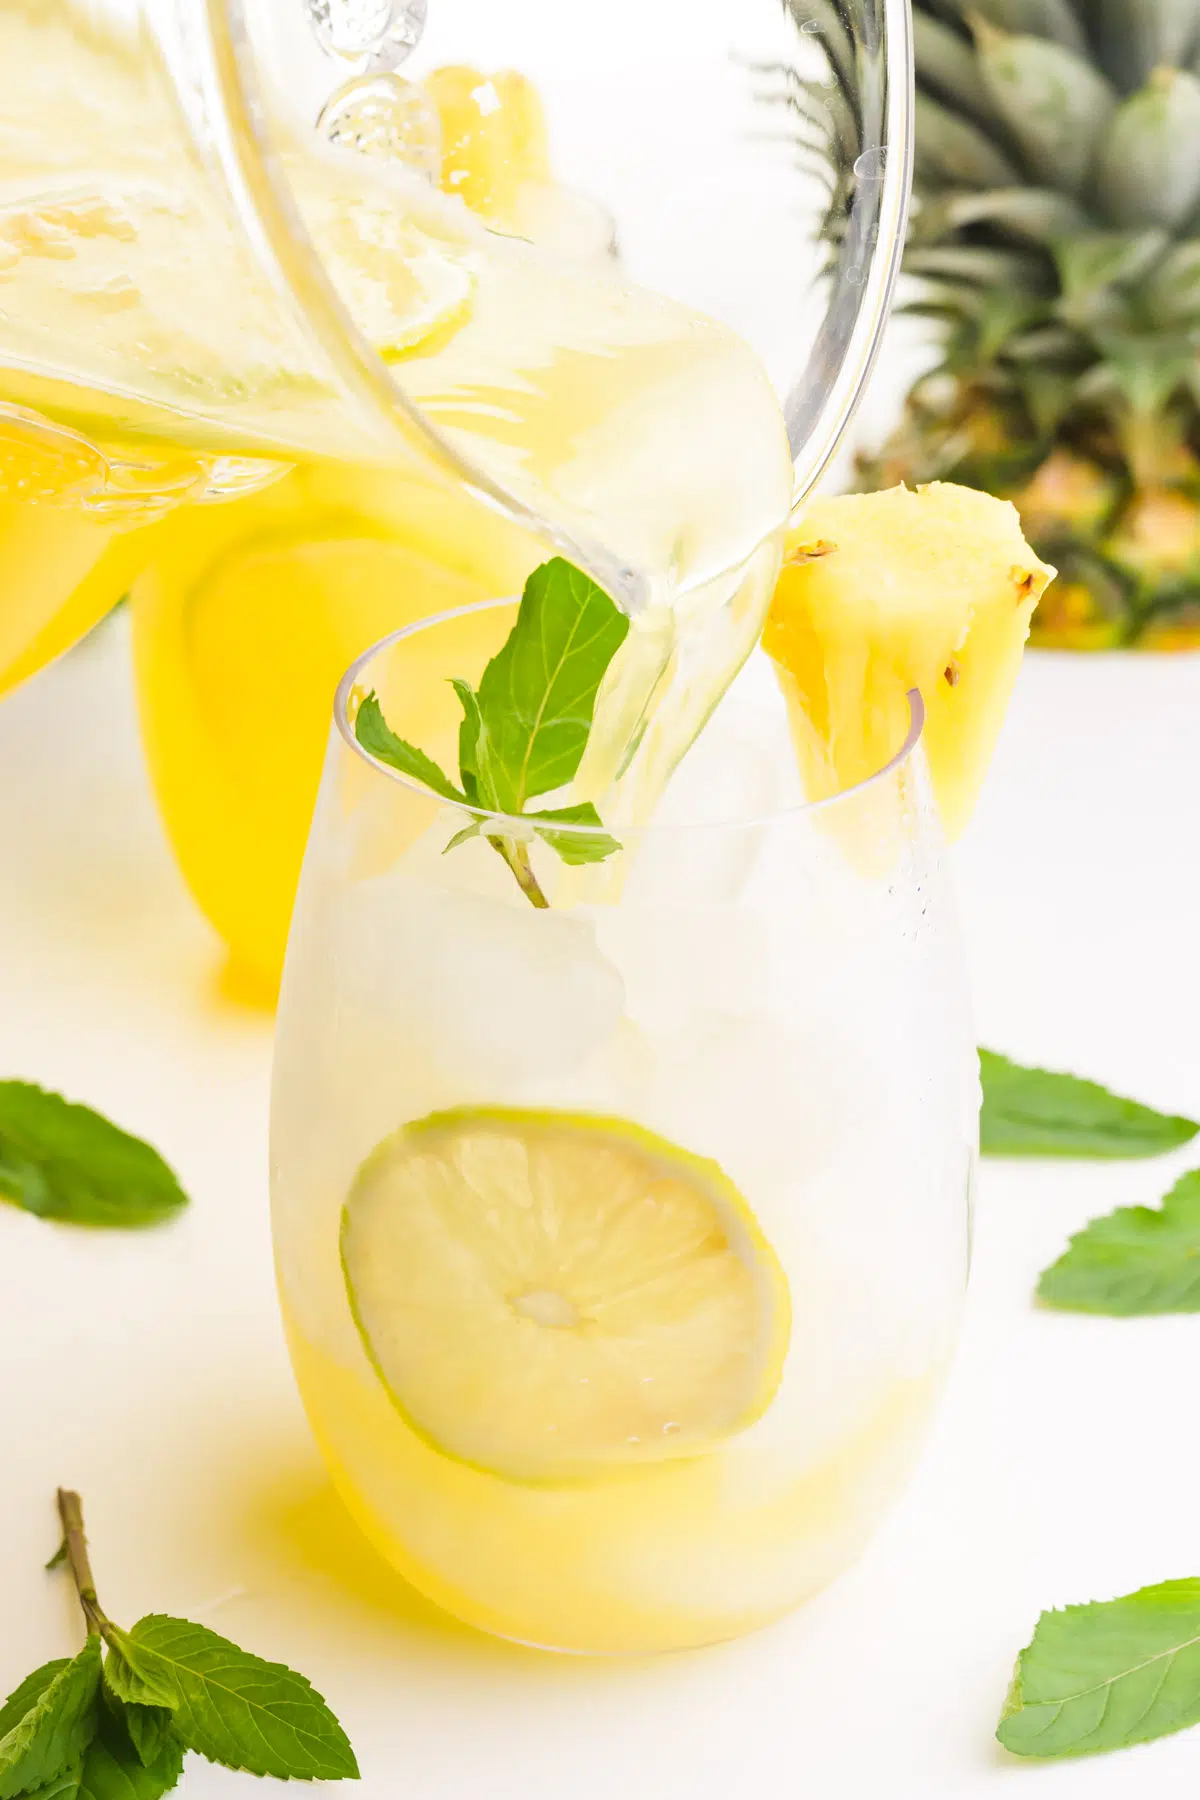 A pitcher is pouring pineapple beverage into a glass of ice with lime slices. There is a mint sprig and pineapple chunk on the glass. There are mint sprigs around the glass and the top of a fresh pineapple in the background.